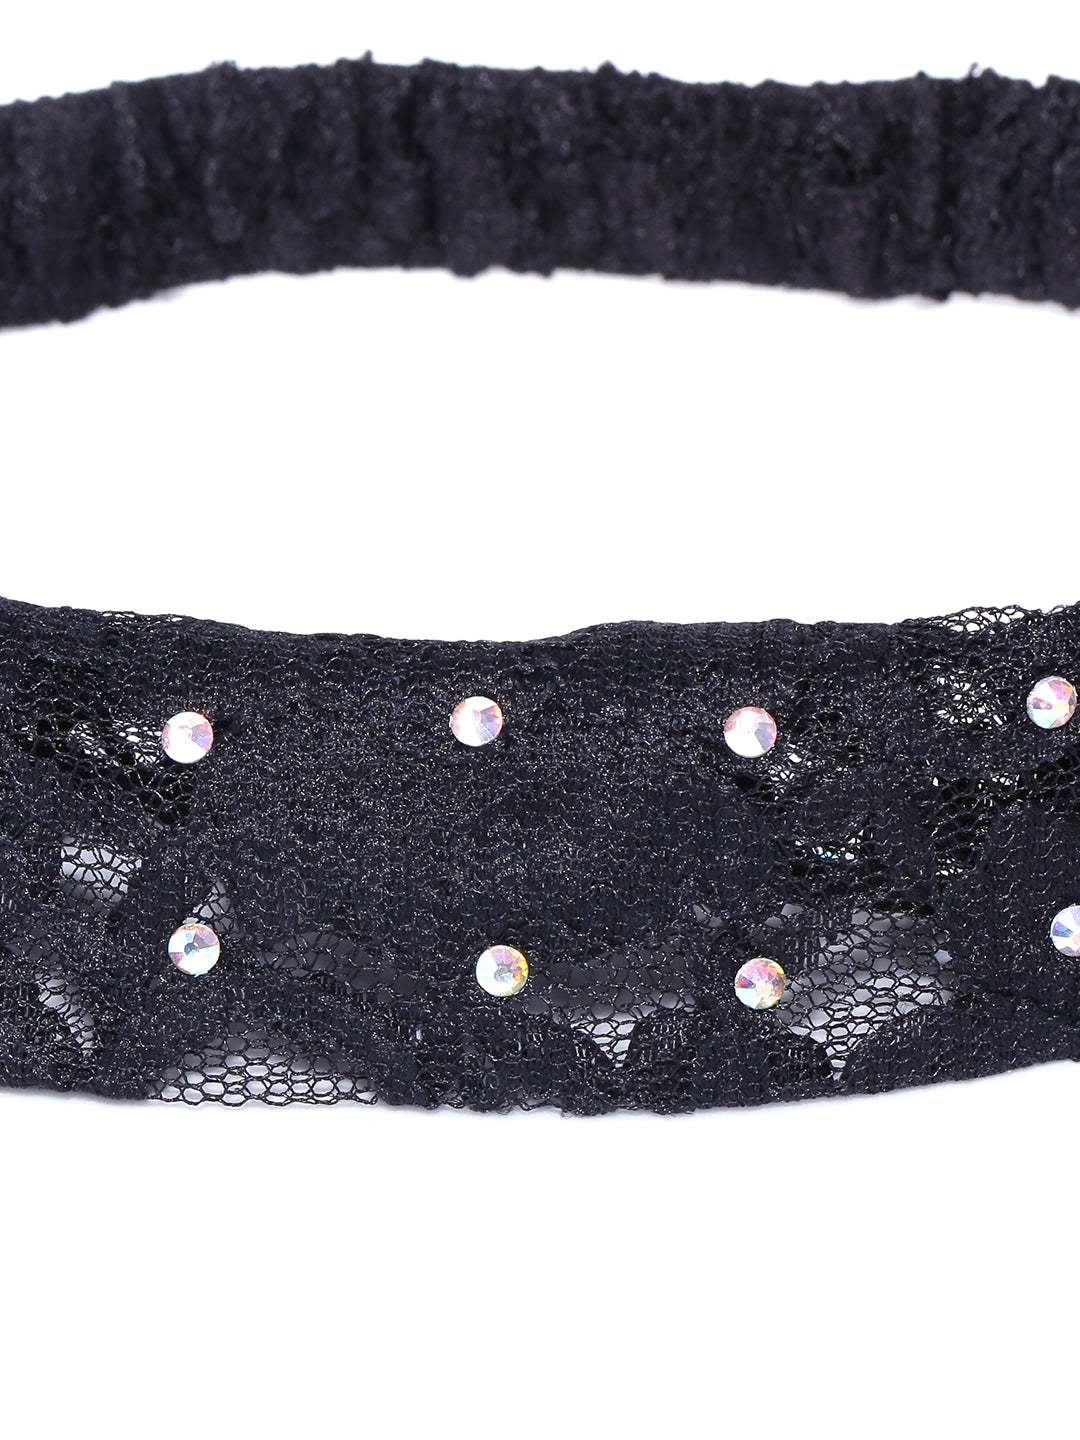 Blueberry black floral lace hair band